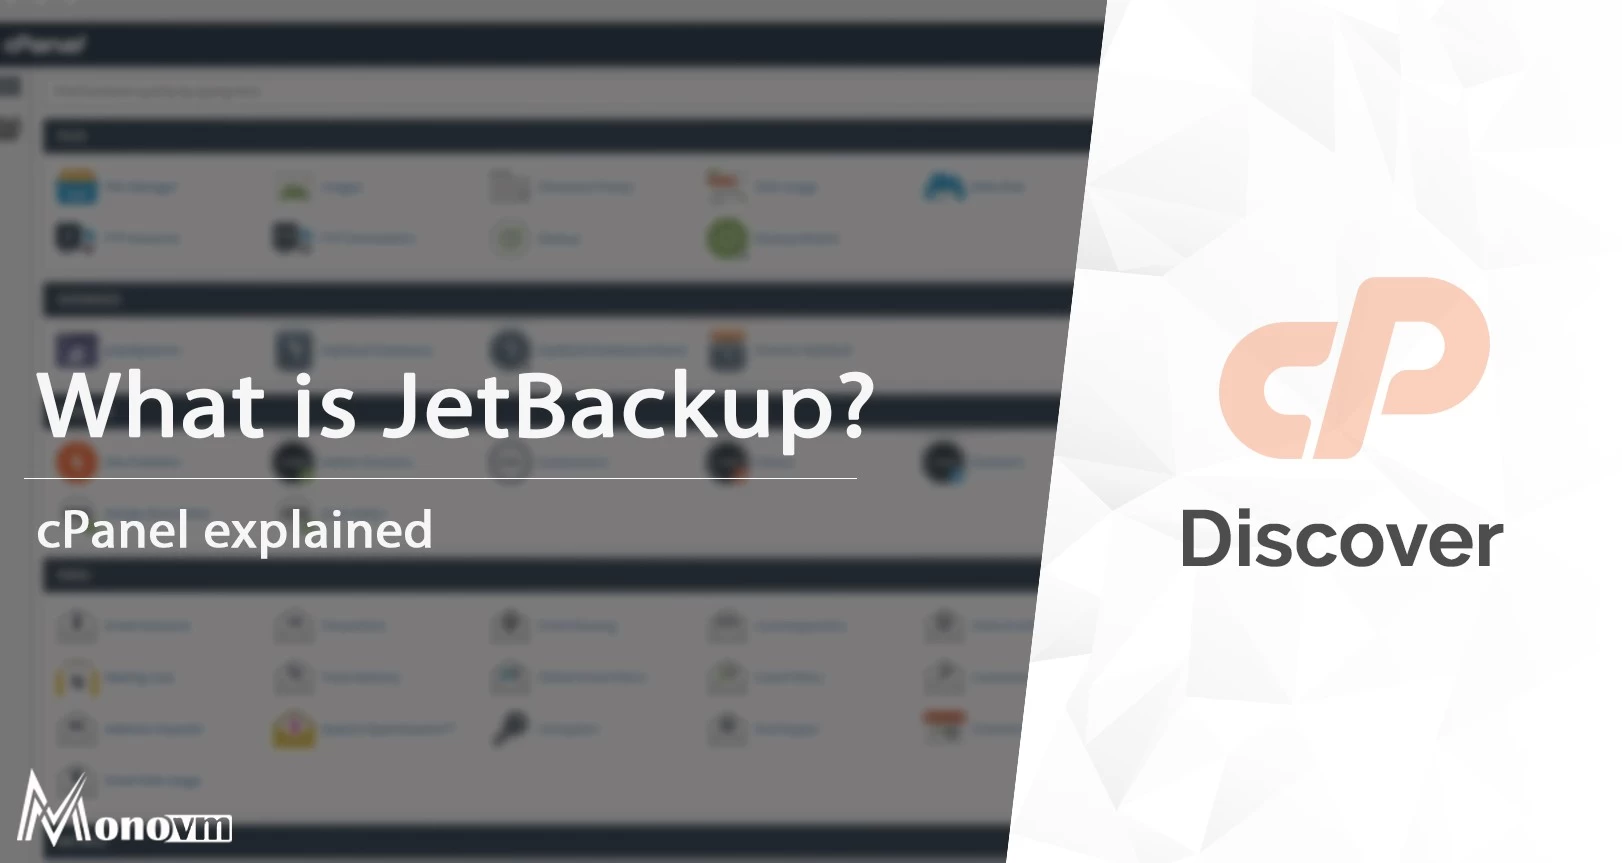 What is JetBackup?